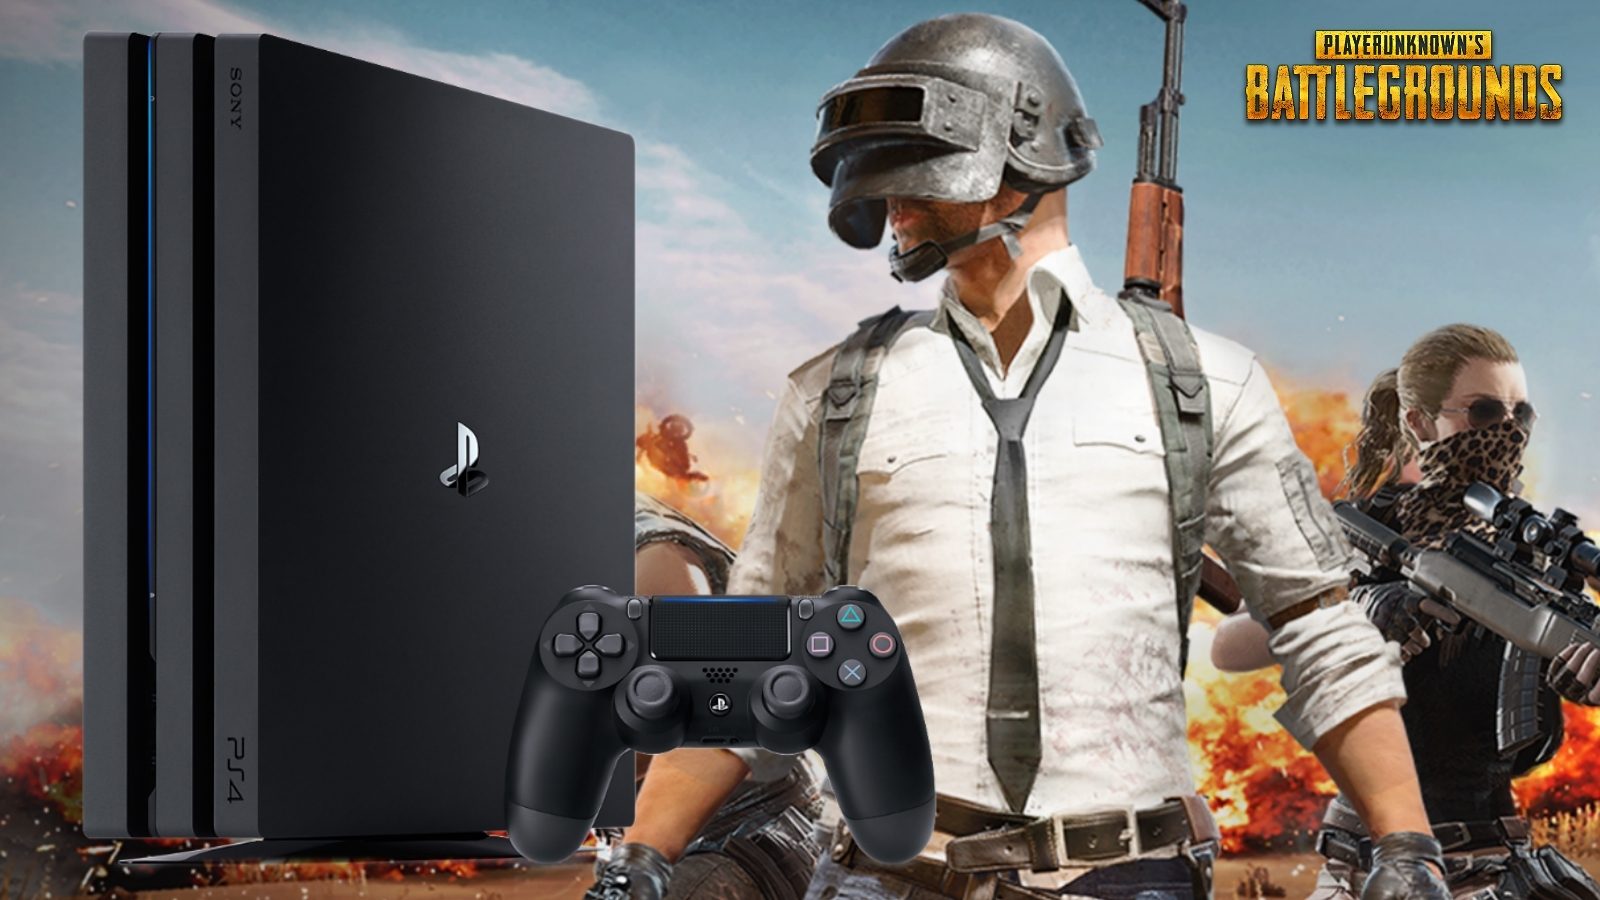 last halvø form PlayerUnknown's Battlegrounds (PUBG) coming to PS4 in December according to  reports - Dexerto